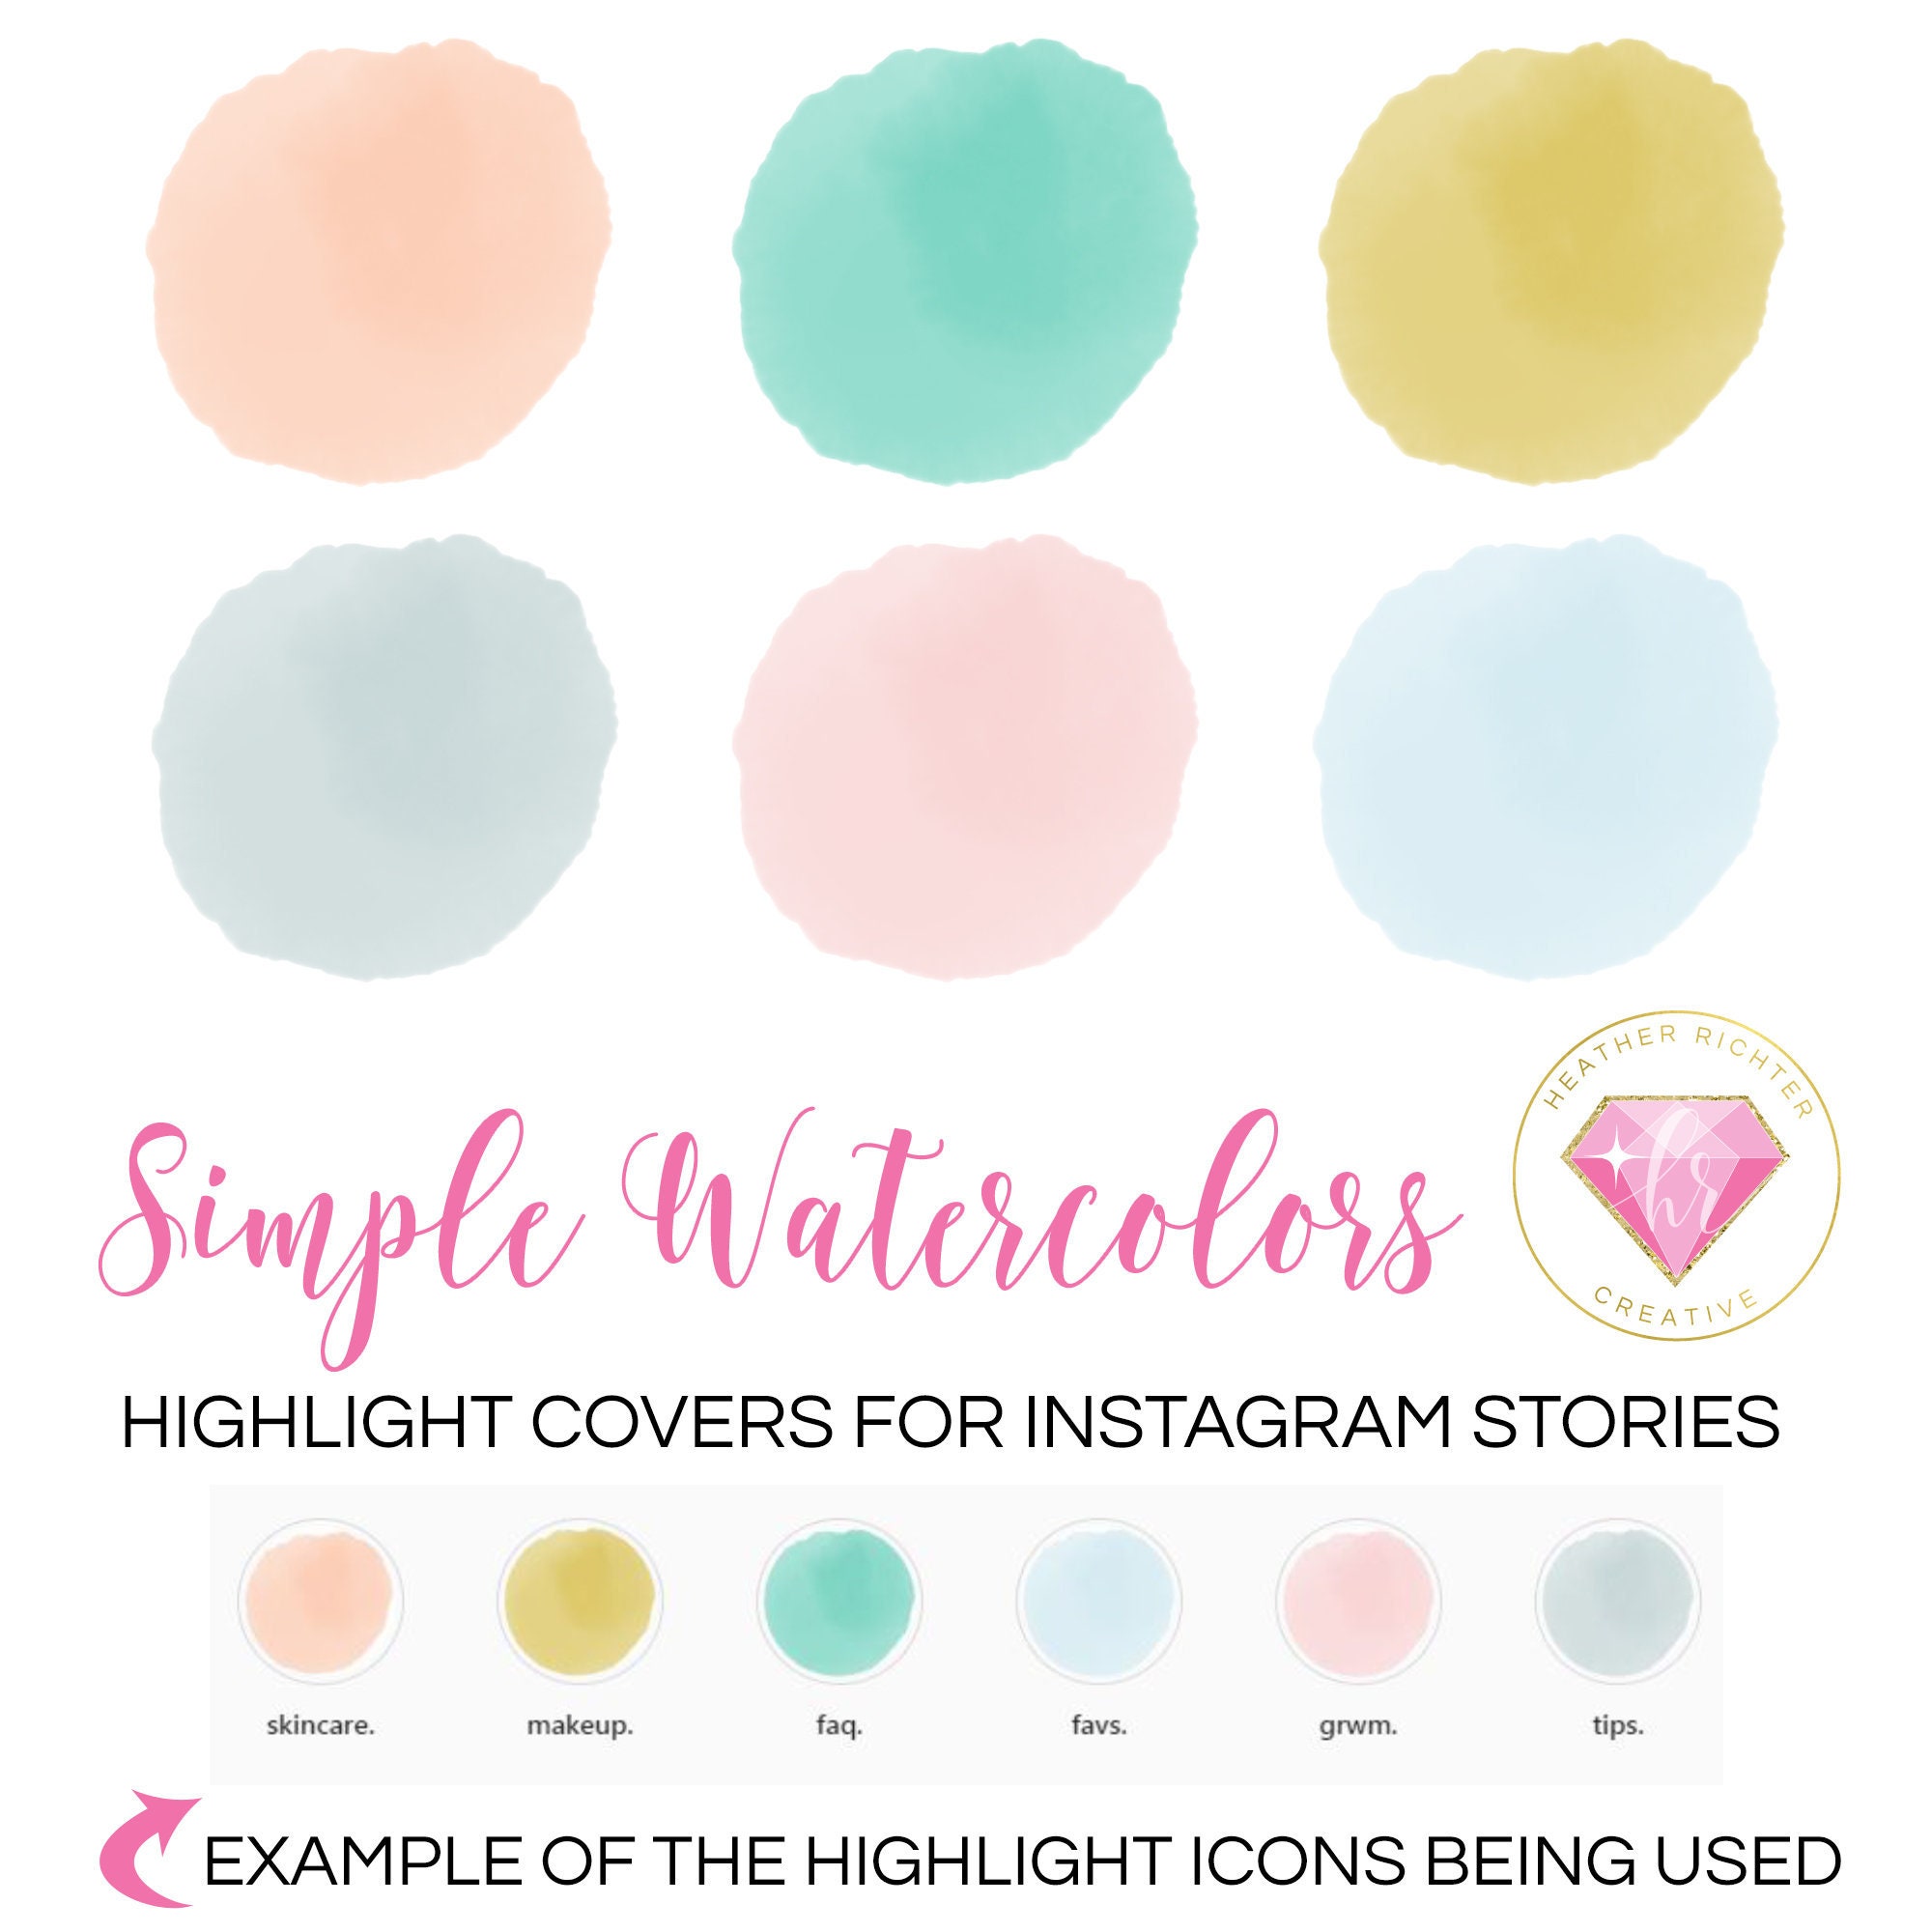 Simple Watercolors Instagram Story Highlight Covers | Etsy